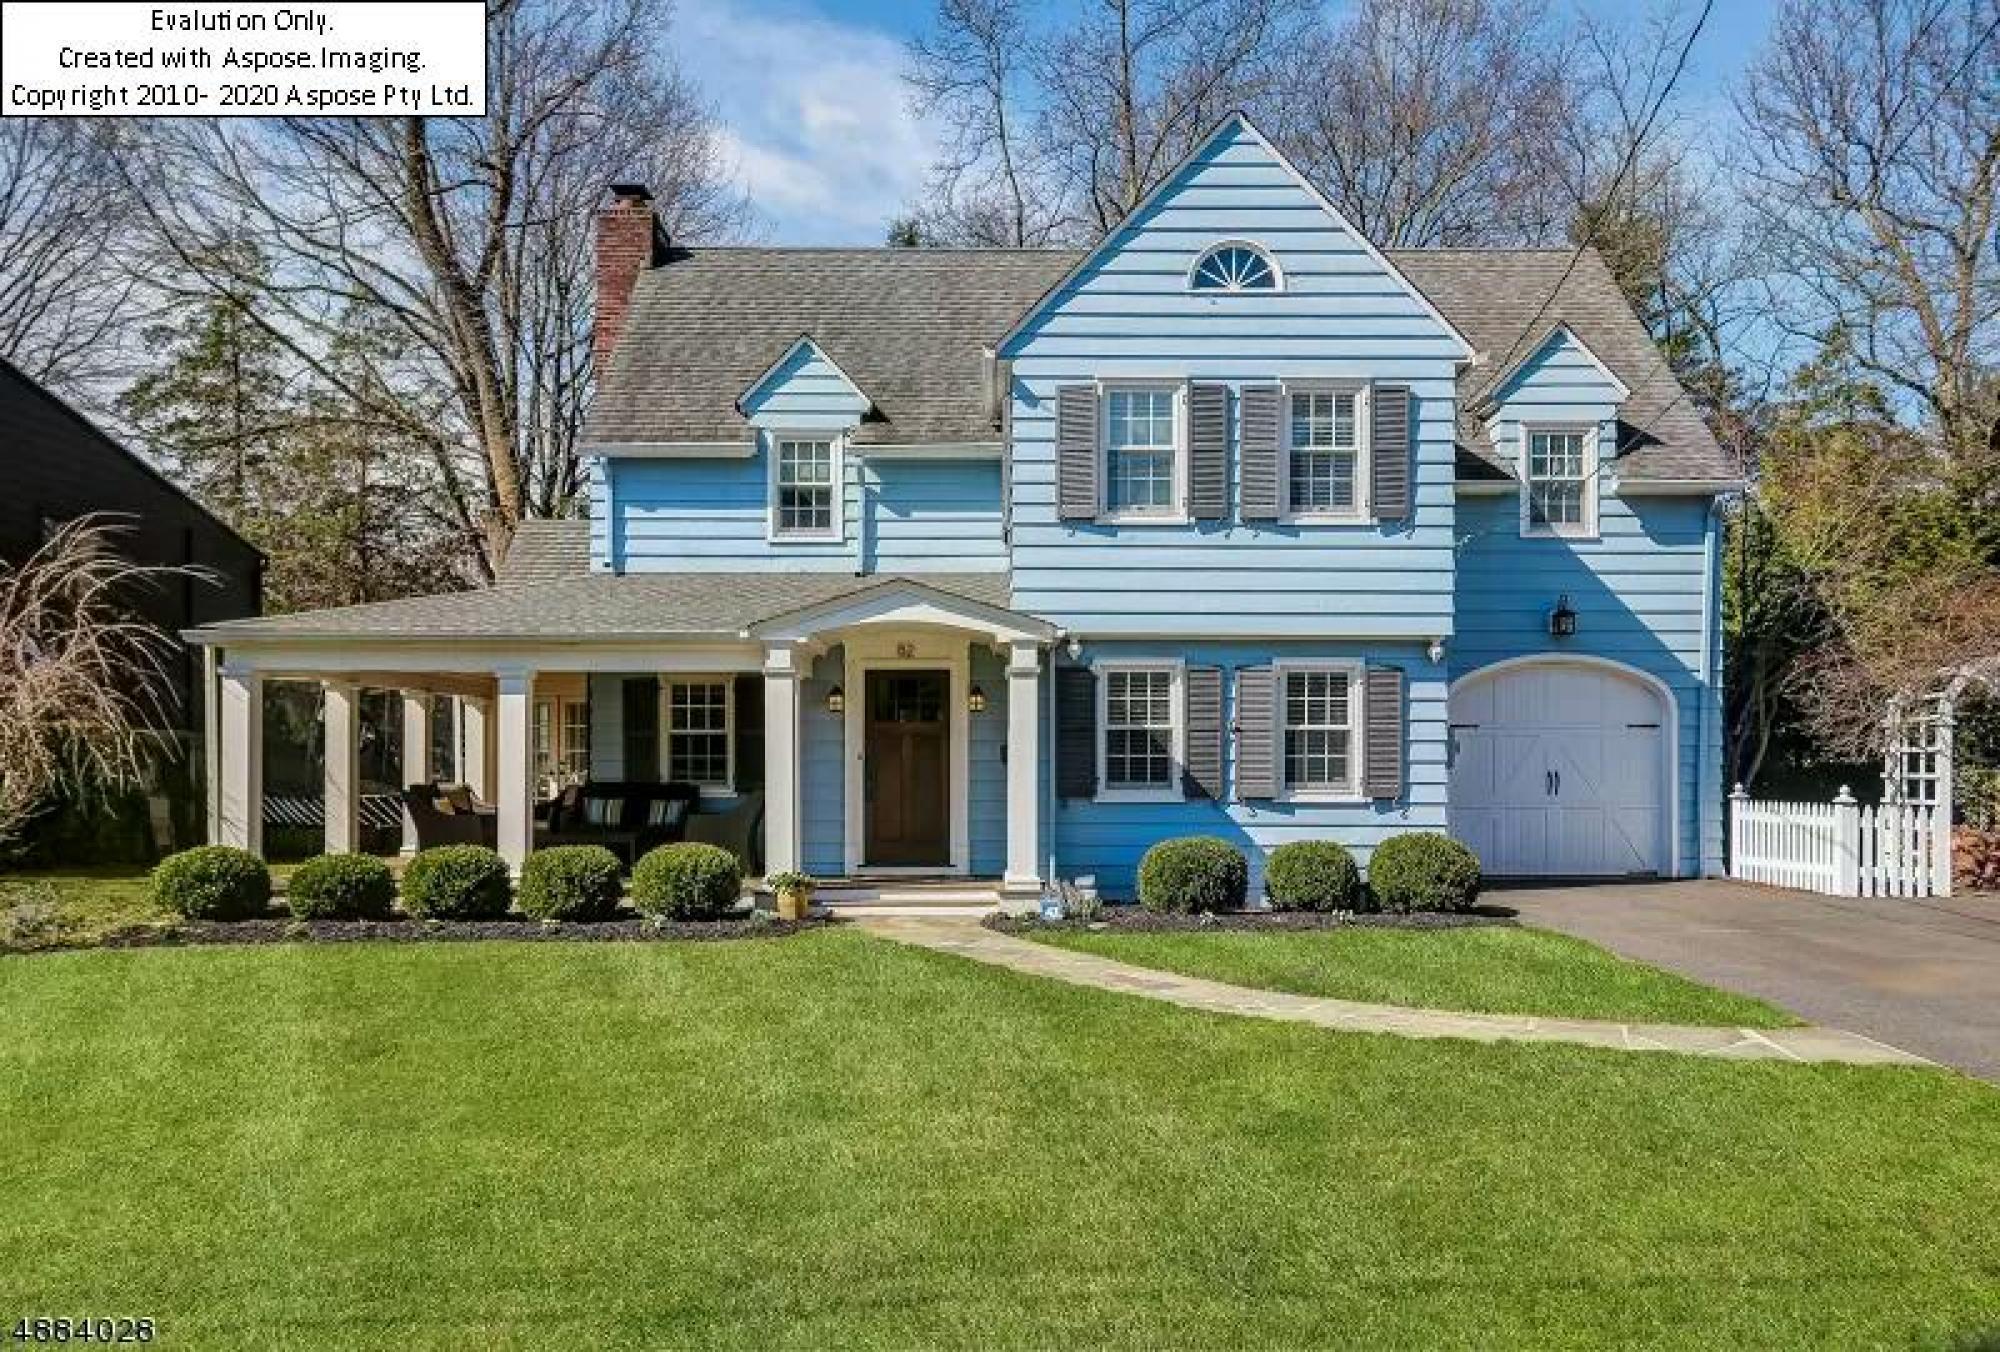 Picture of Home For Sale in Short Hills, New Jersey, United States